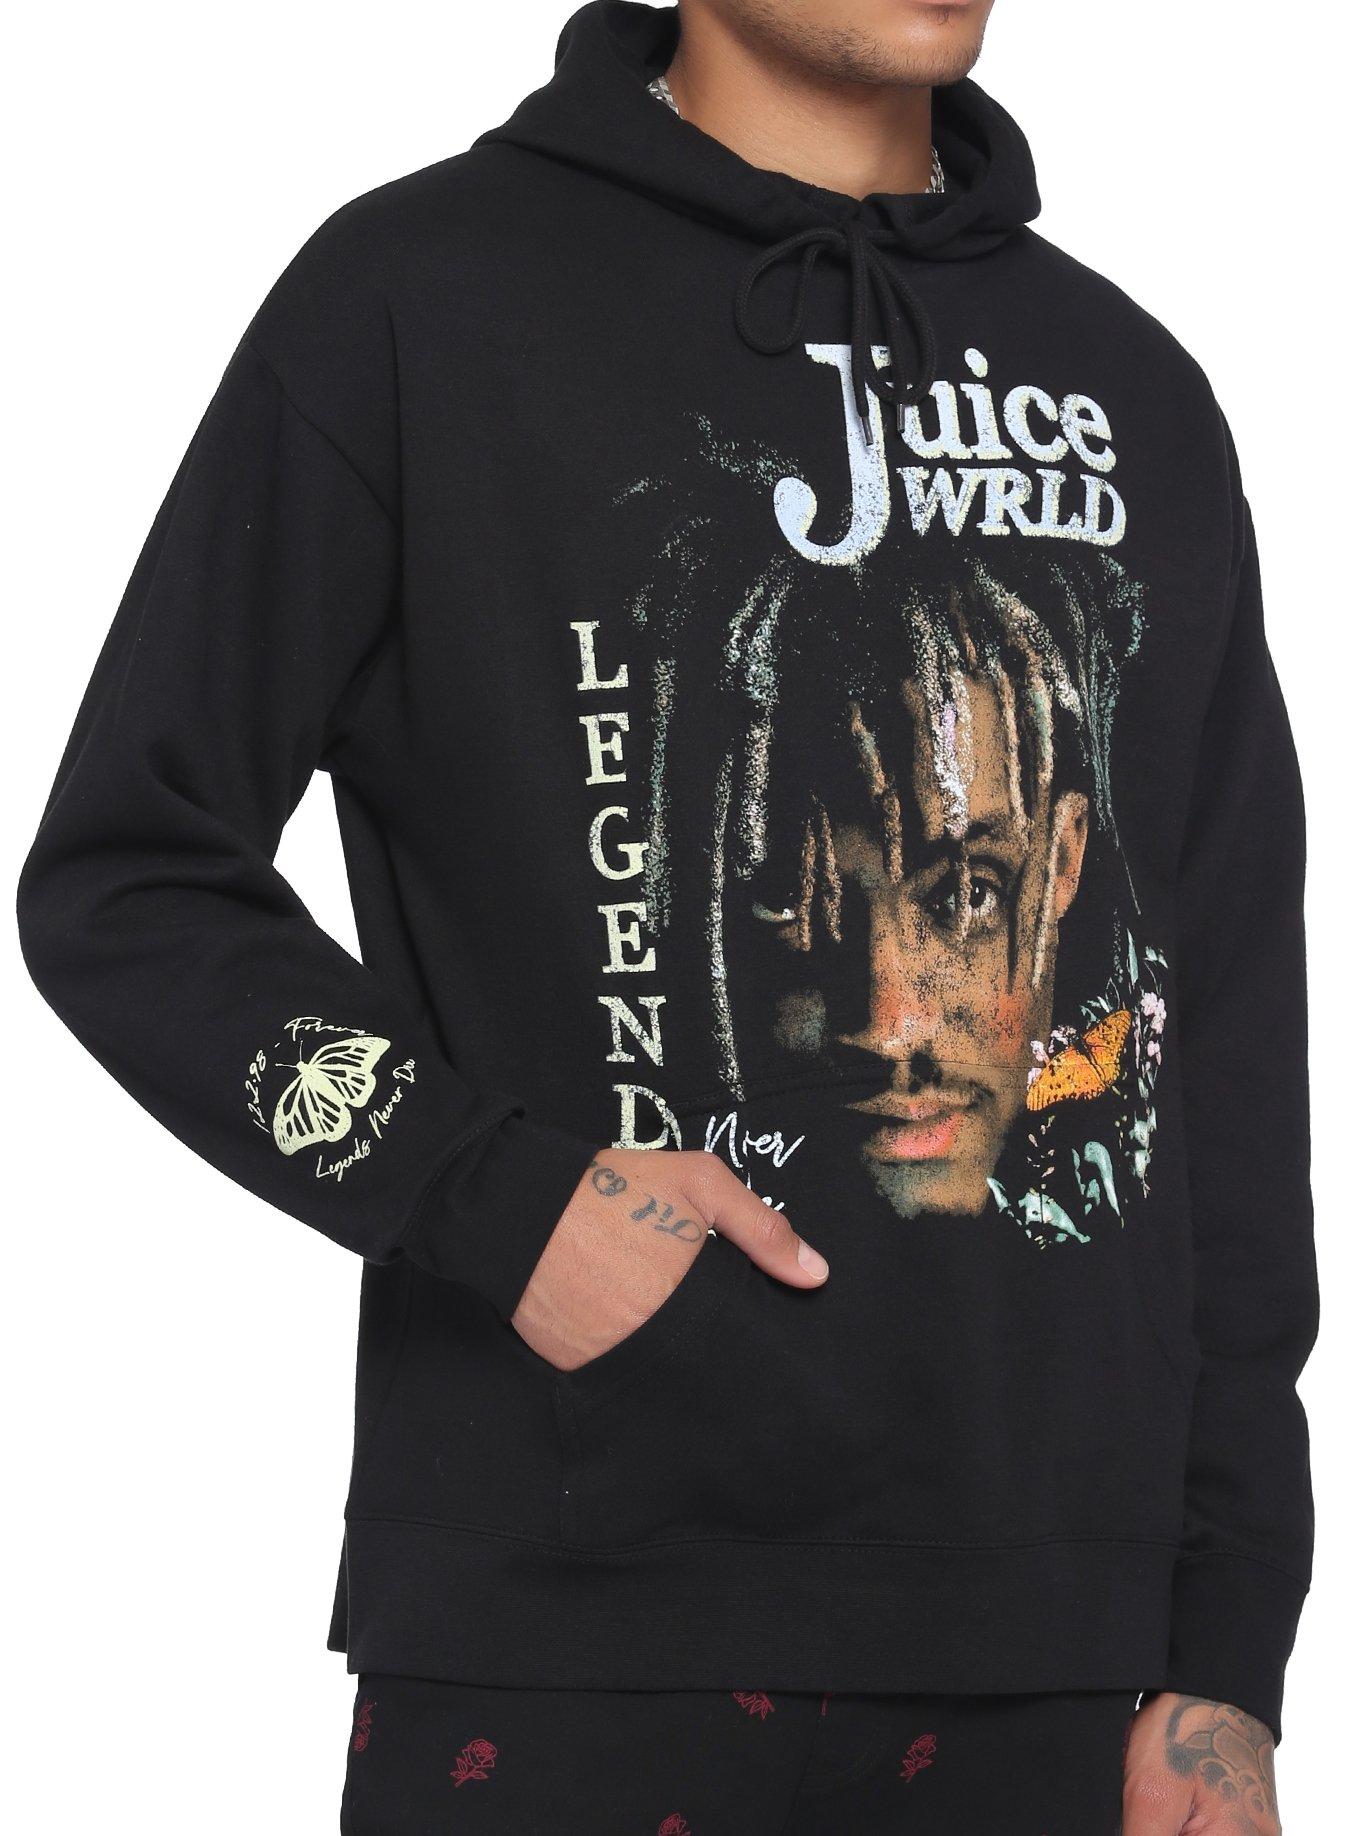 Does anyone know what jacket this is? : r/JuiceWRLD